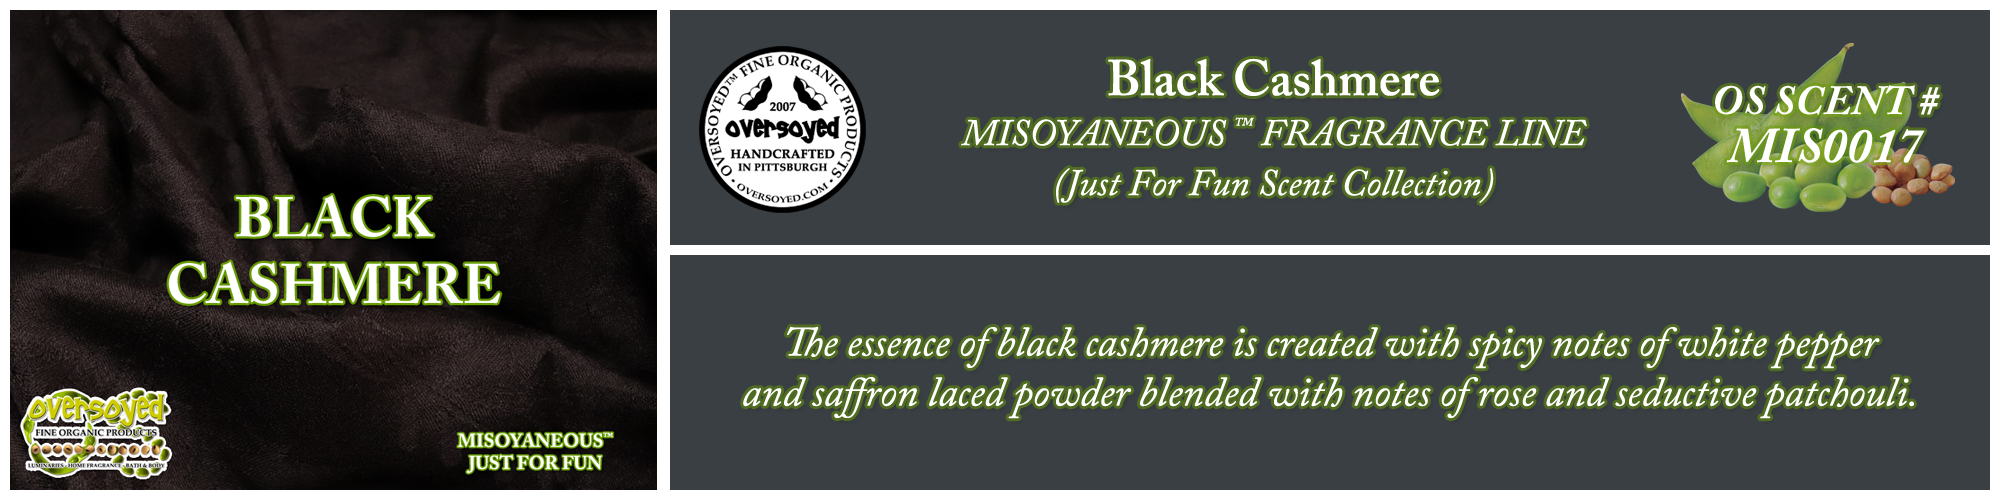 Black Cashmere Handcrafted Products Collection